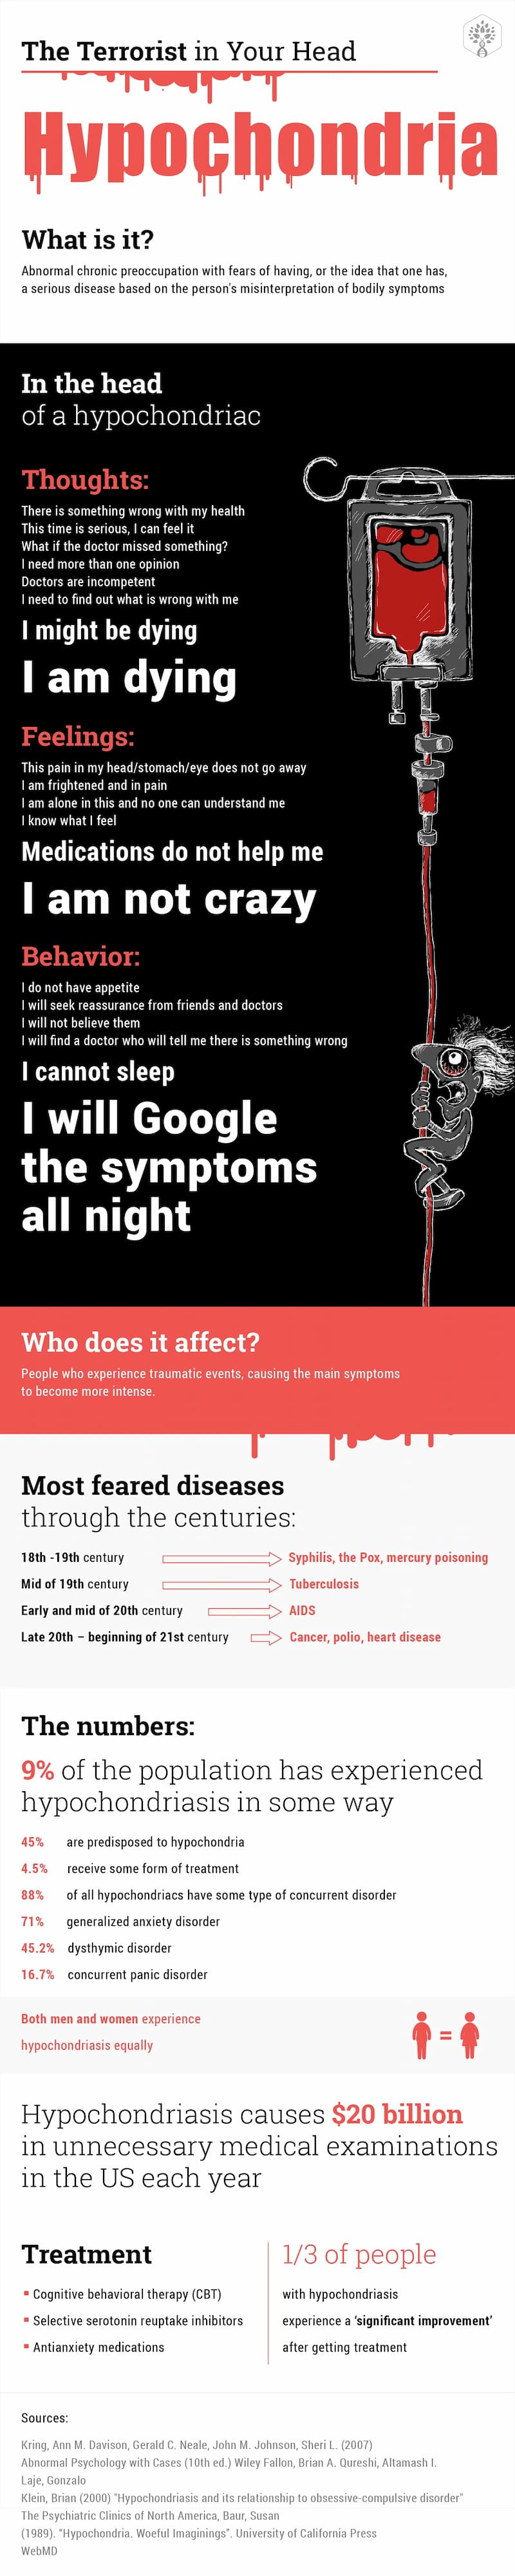 What is hypochondria?